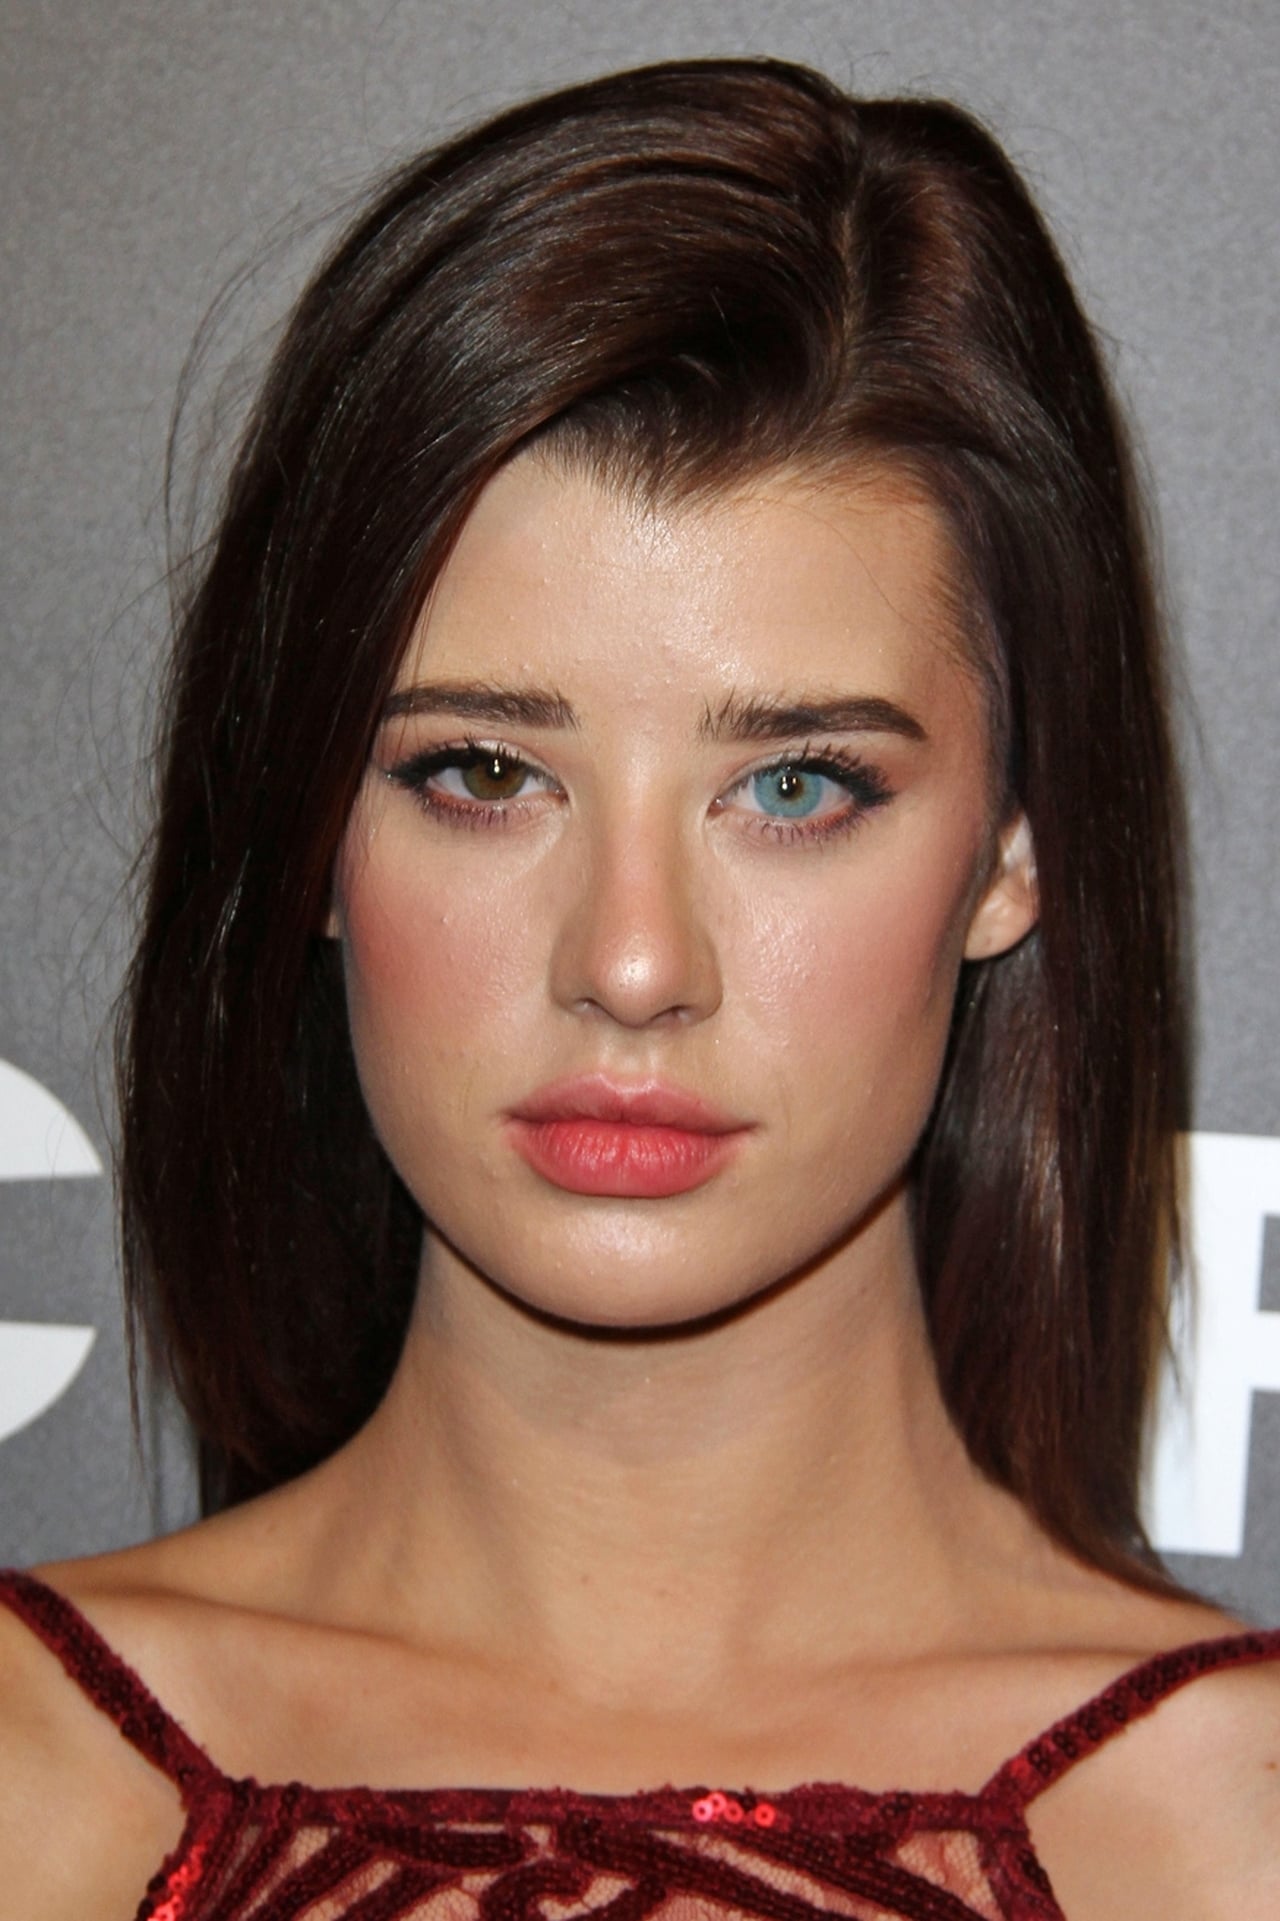 Sarah Mcdaniel Interview The Latest Cover Has An Image Of Mcdaniel